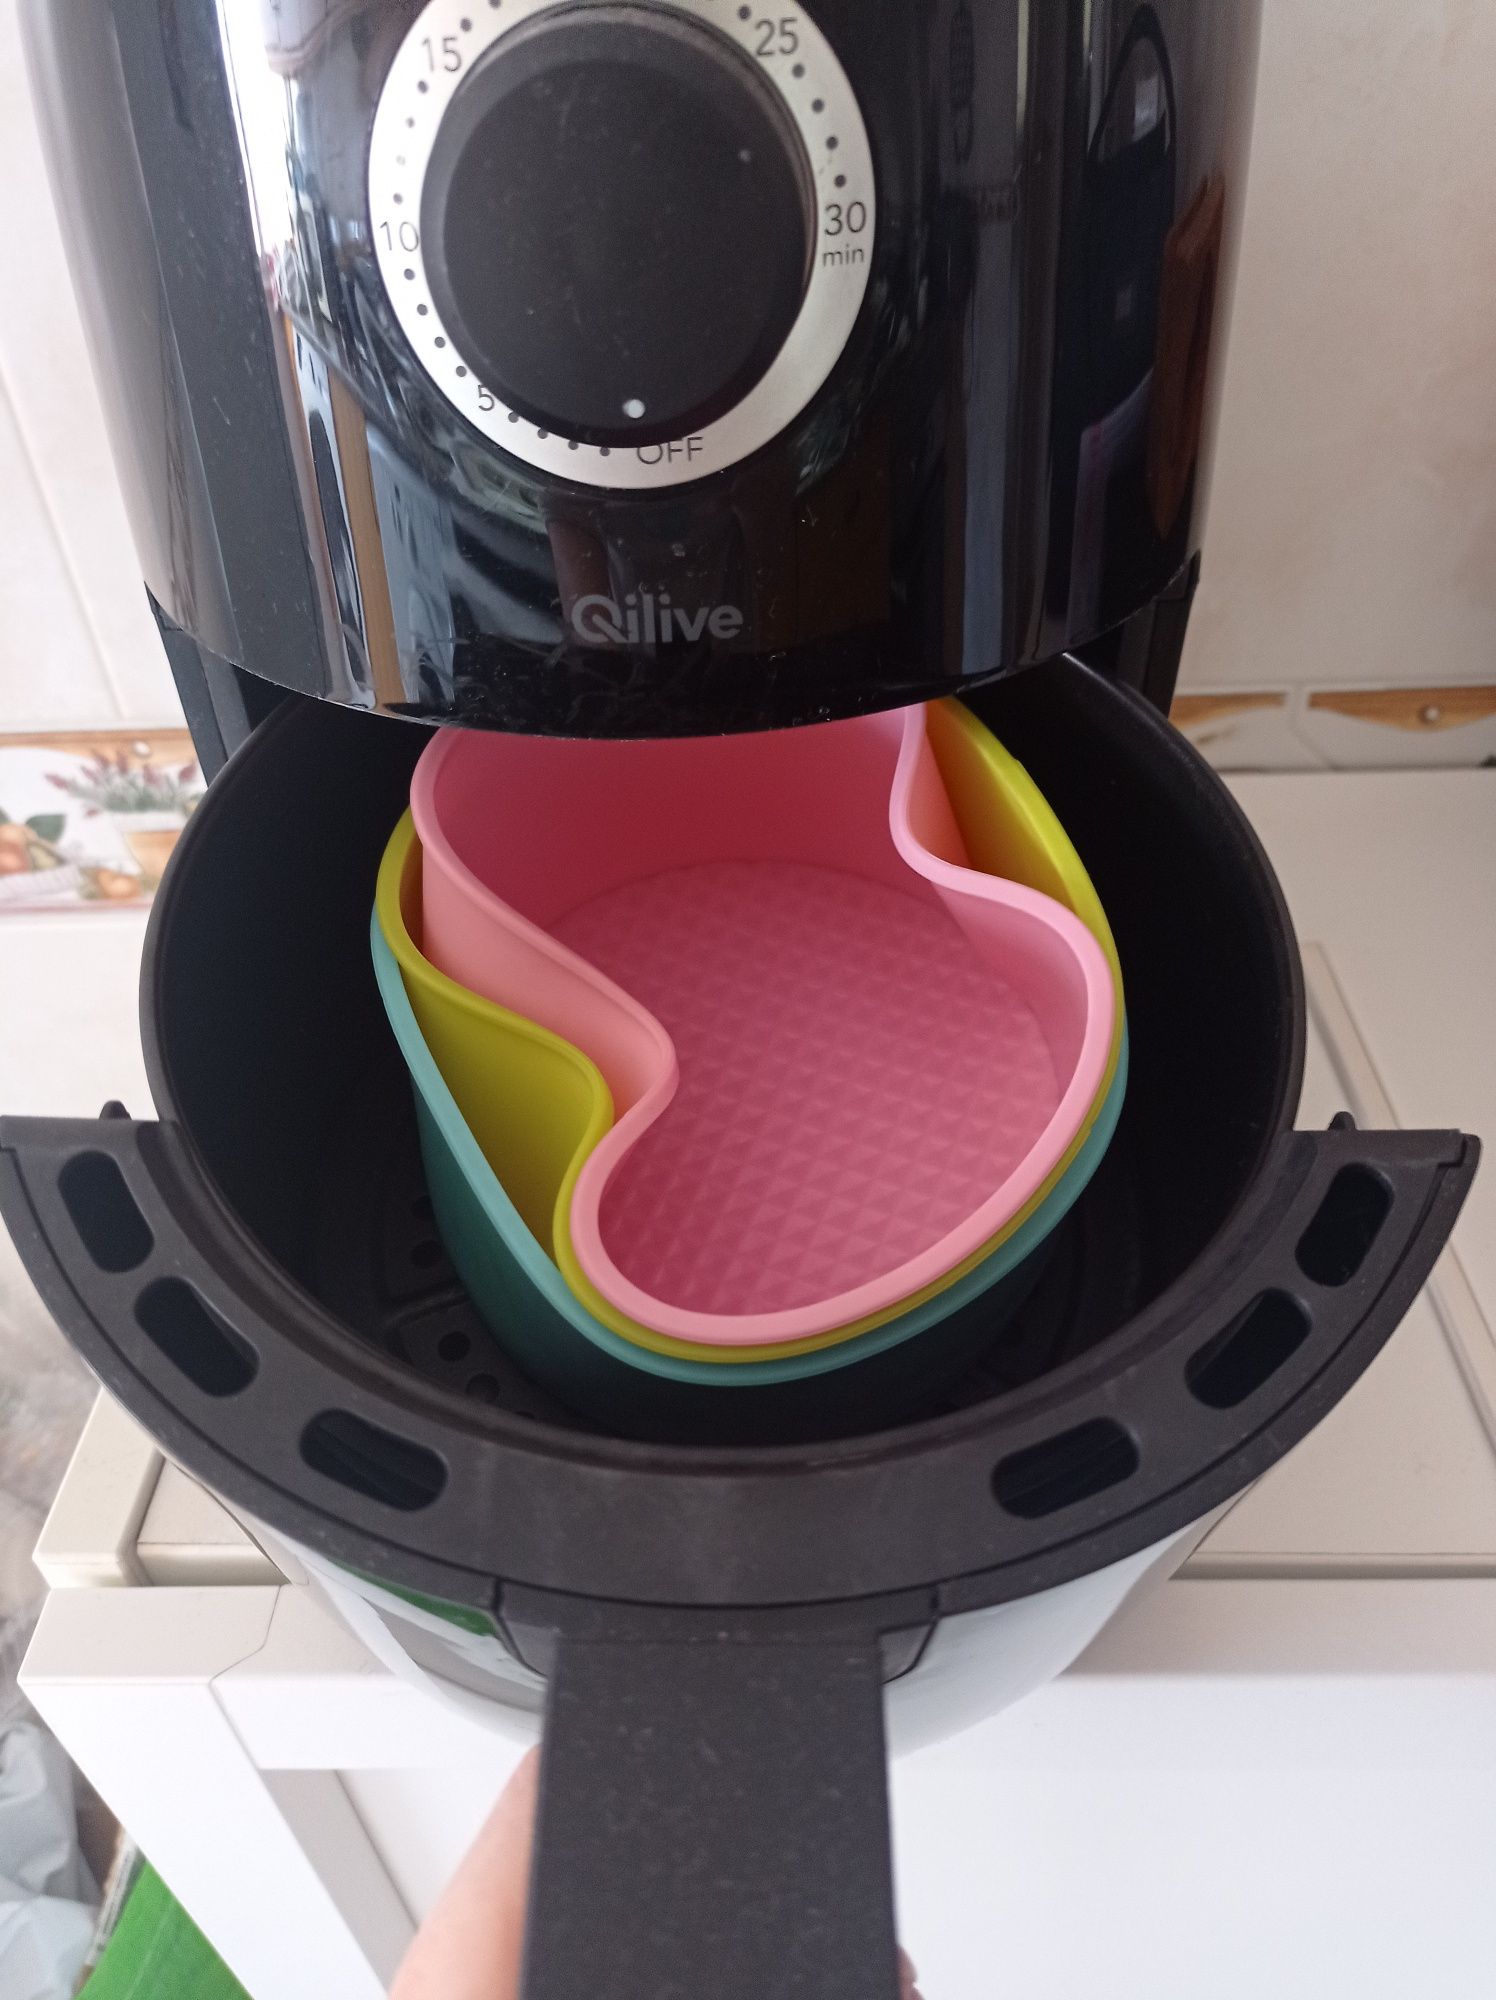 Airfryer Quilive